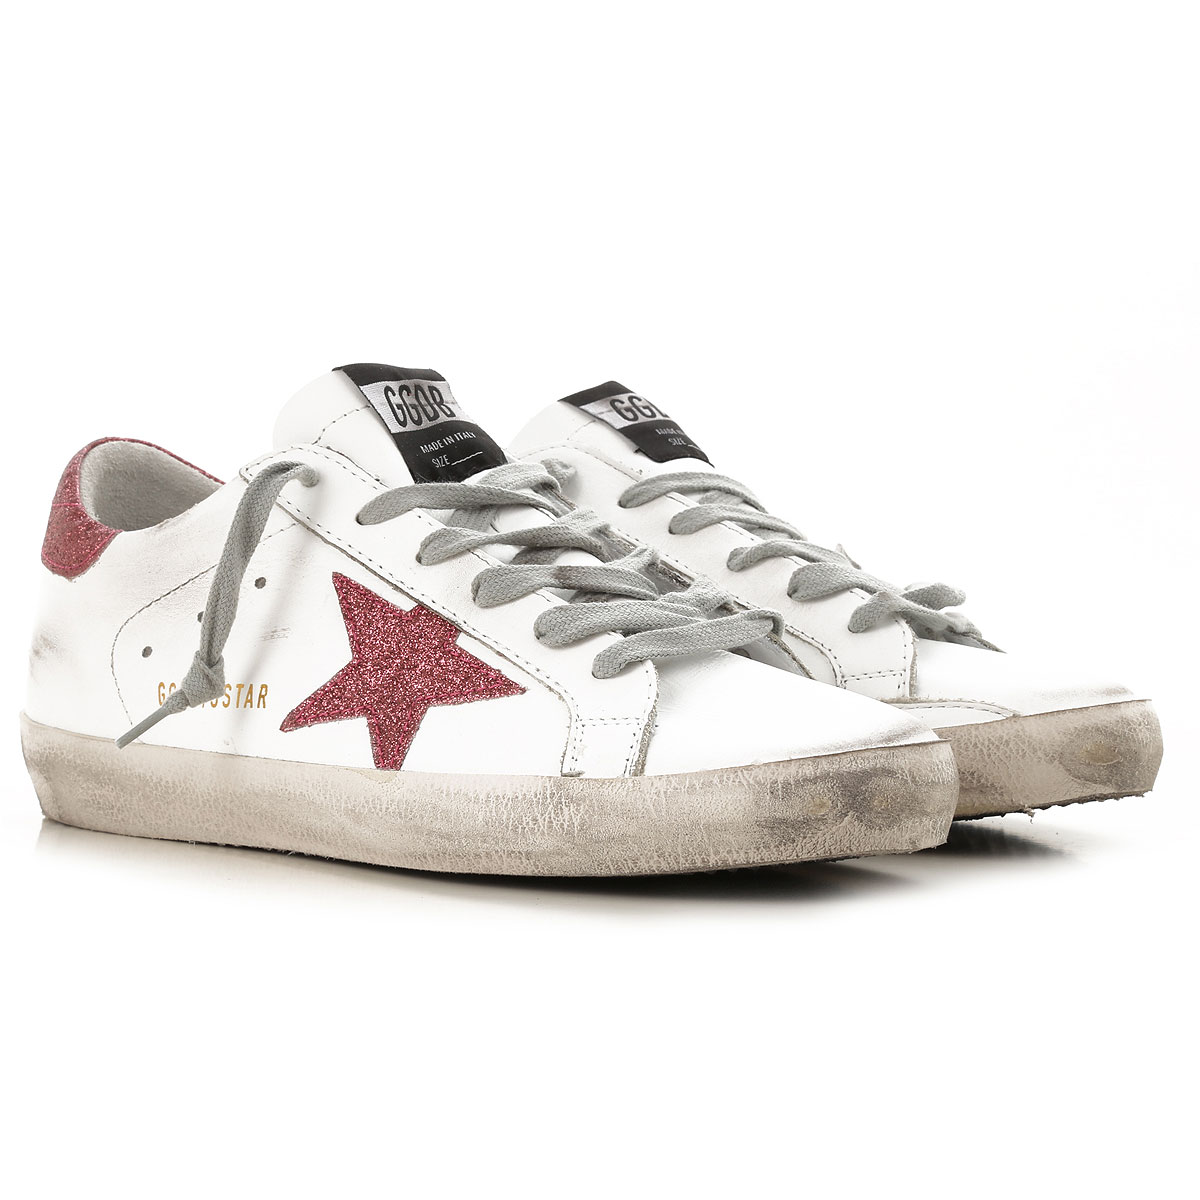 Womens Shoes Golden Goose, Style code: g33ws590-h24-